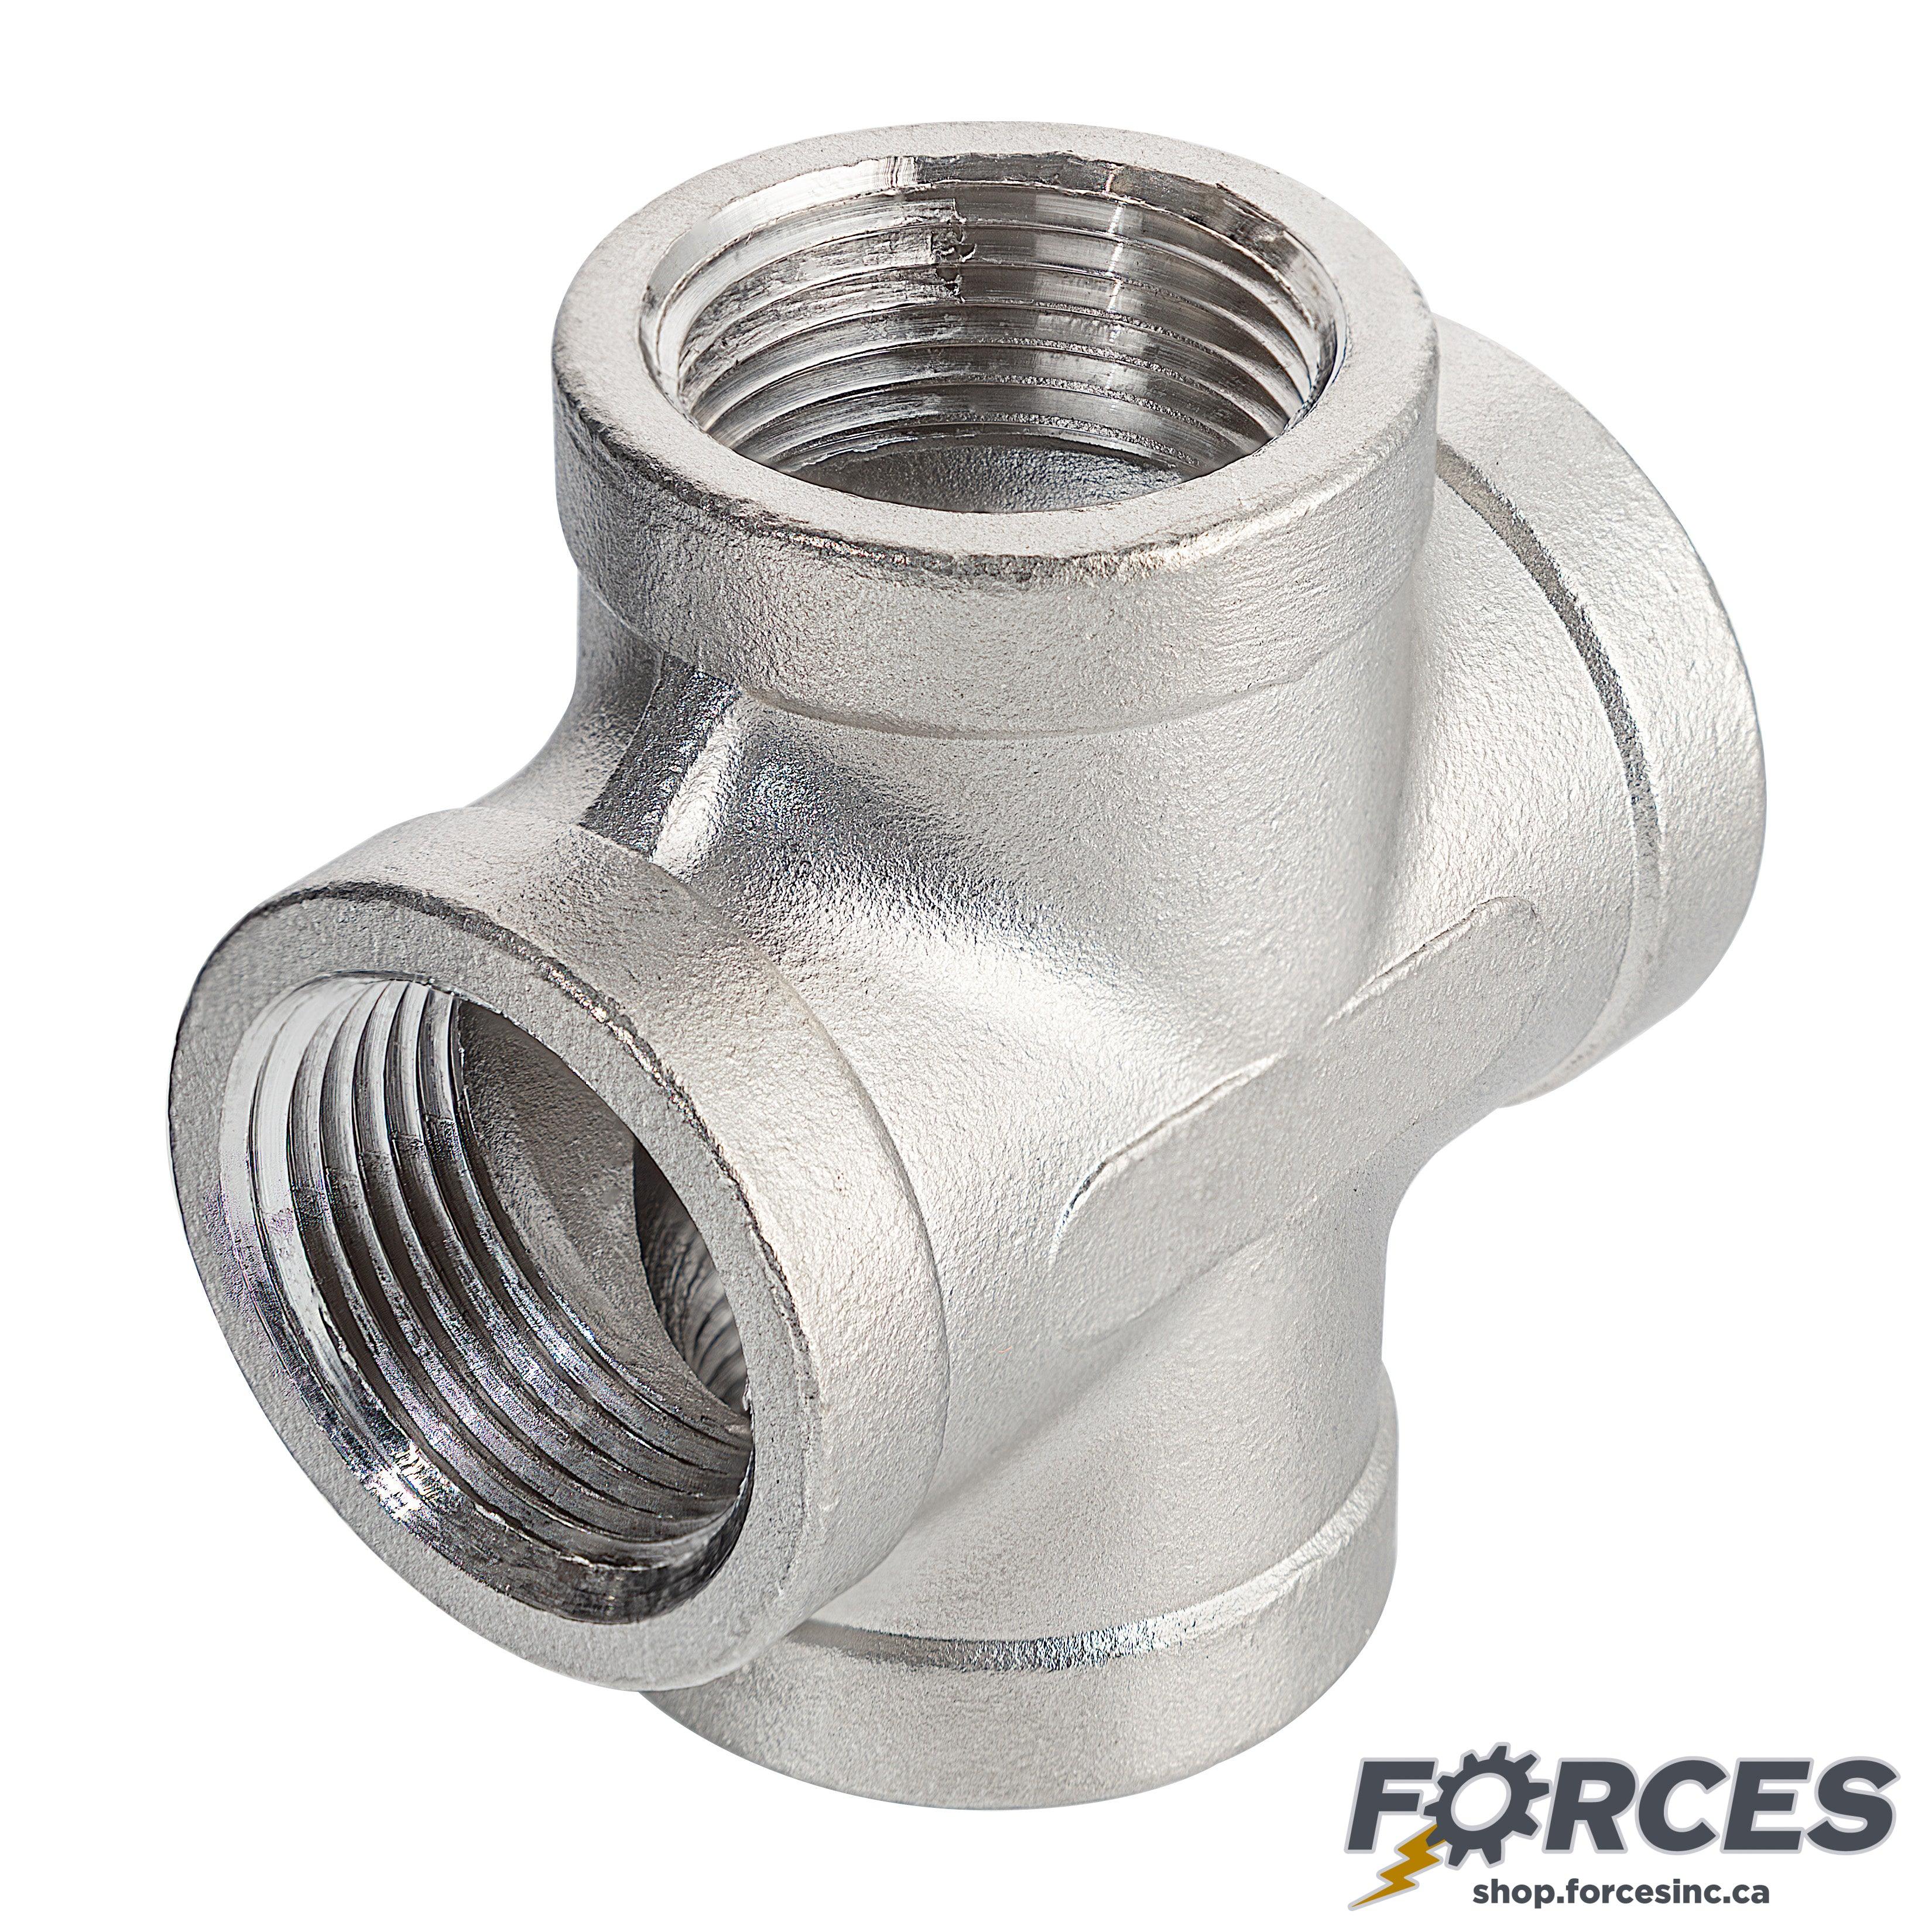 1-1/2" Cross NPT #150 - Stainless Steel 316 - Forces Inc